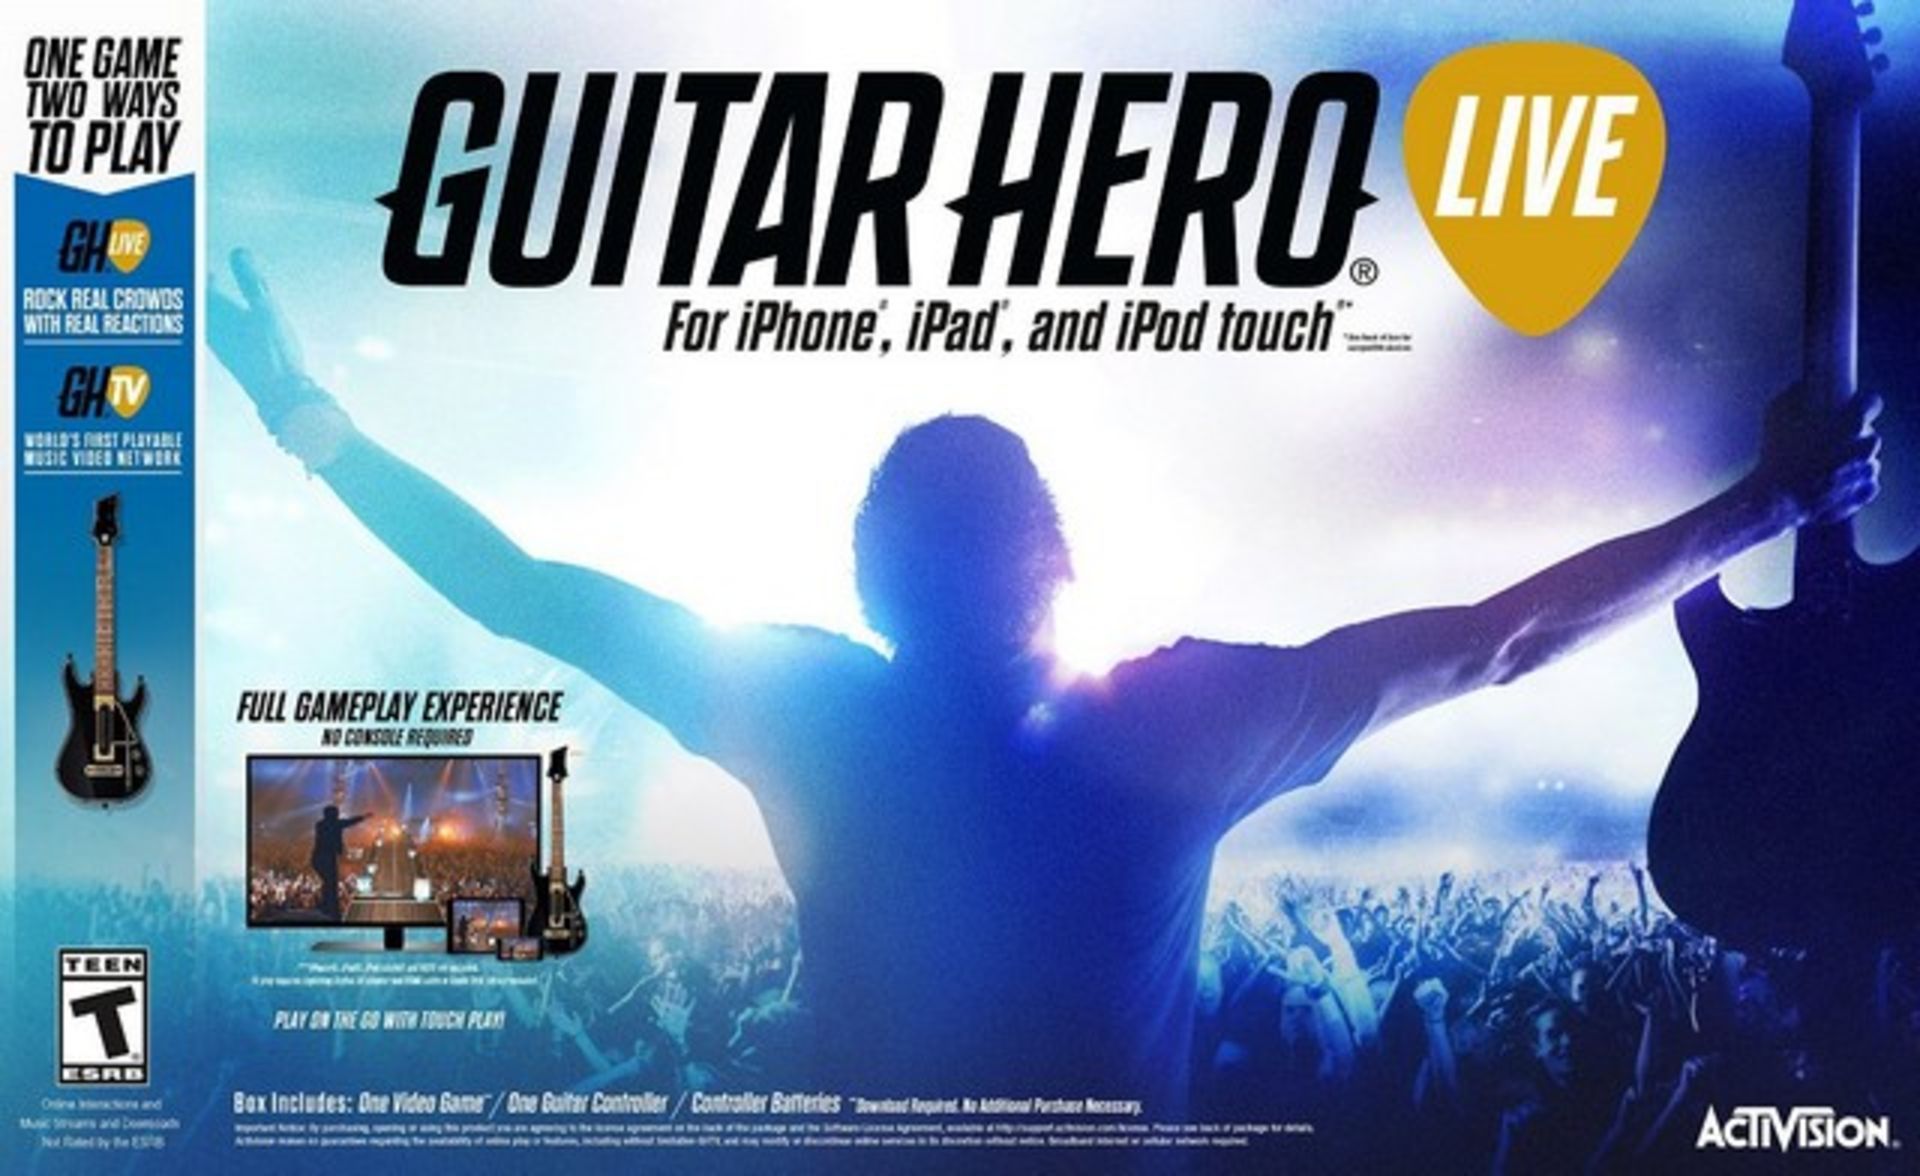 V Brand New Guitar Hero Live For iPhone iPad And iPod Touch Includes Video Game/Guitar Controller/